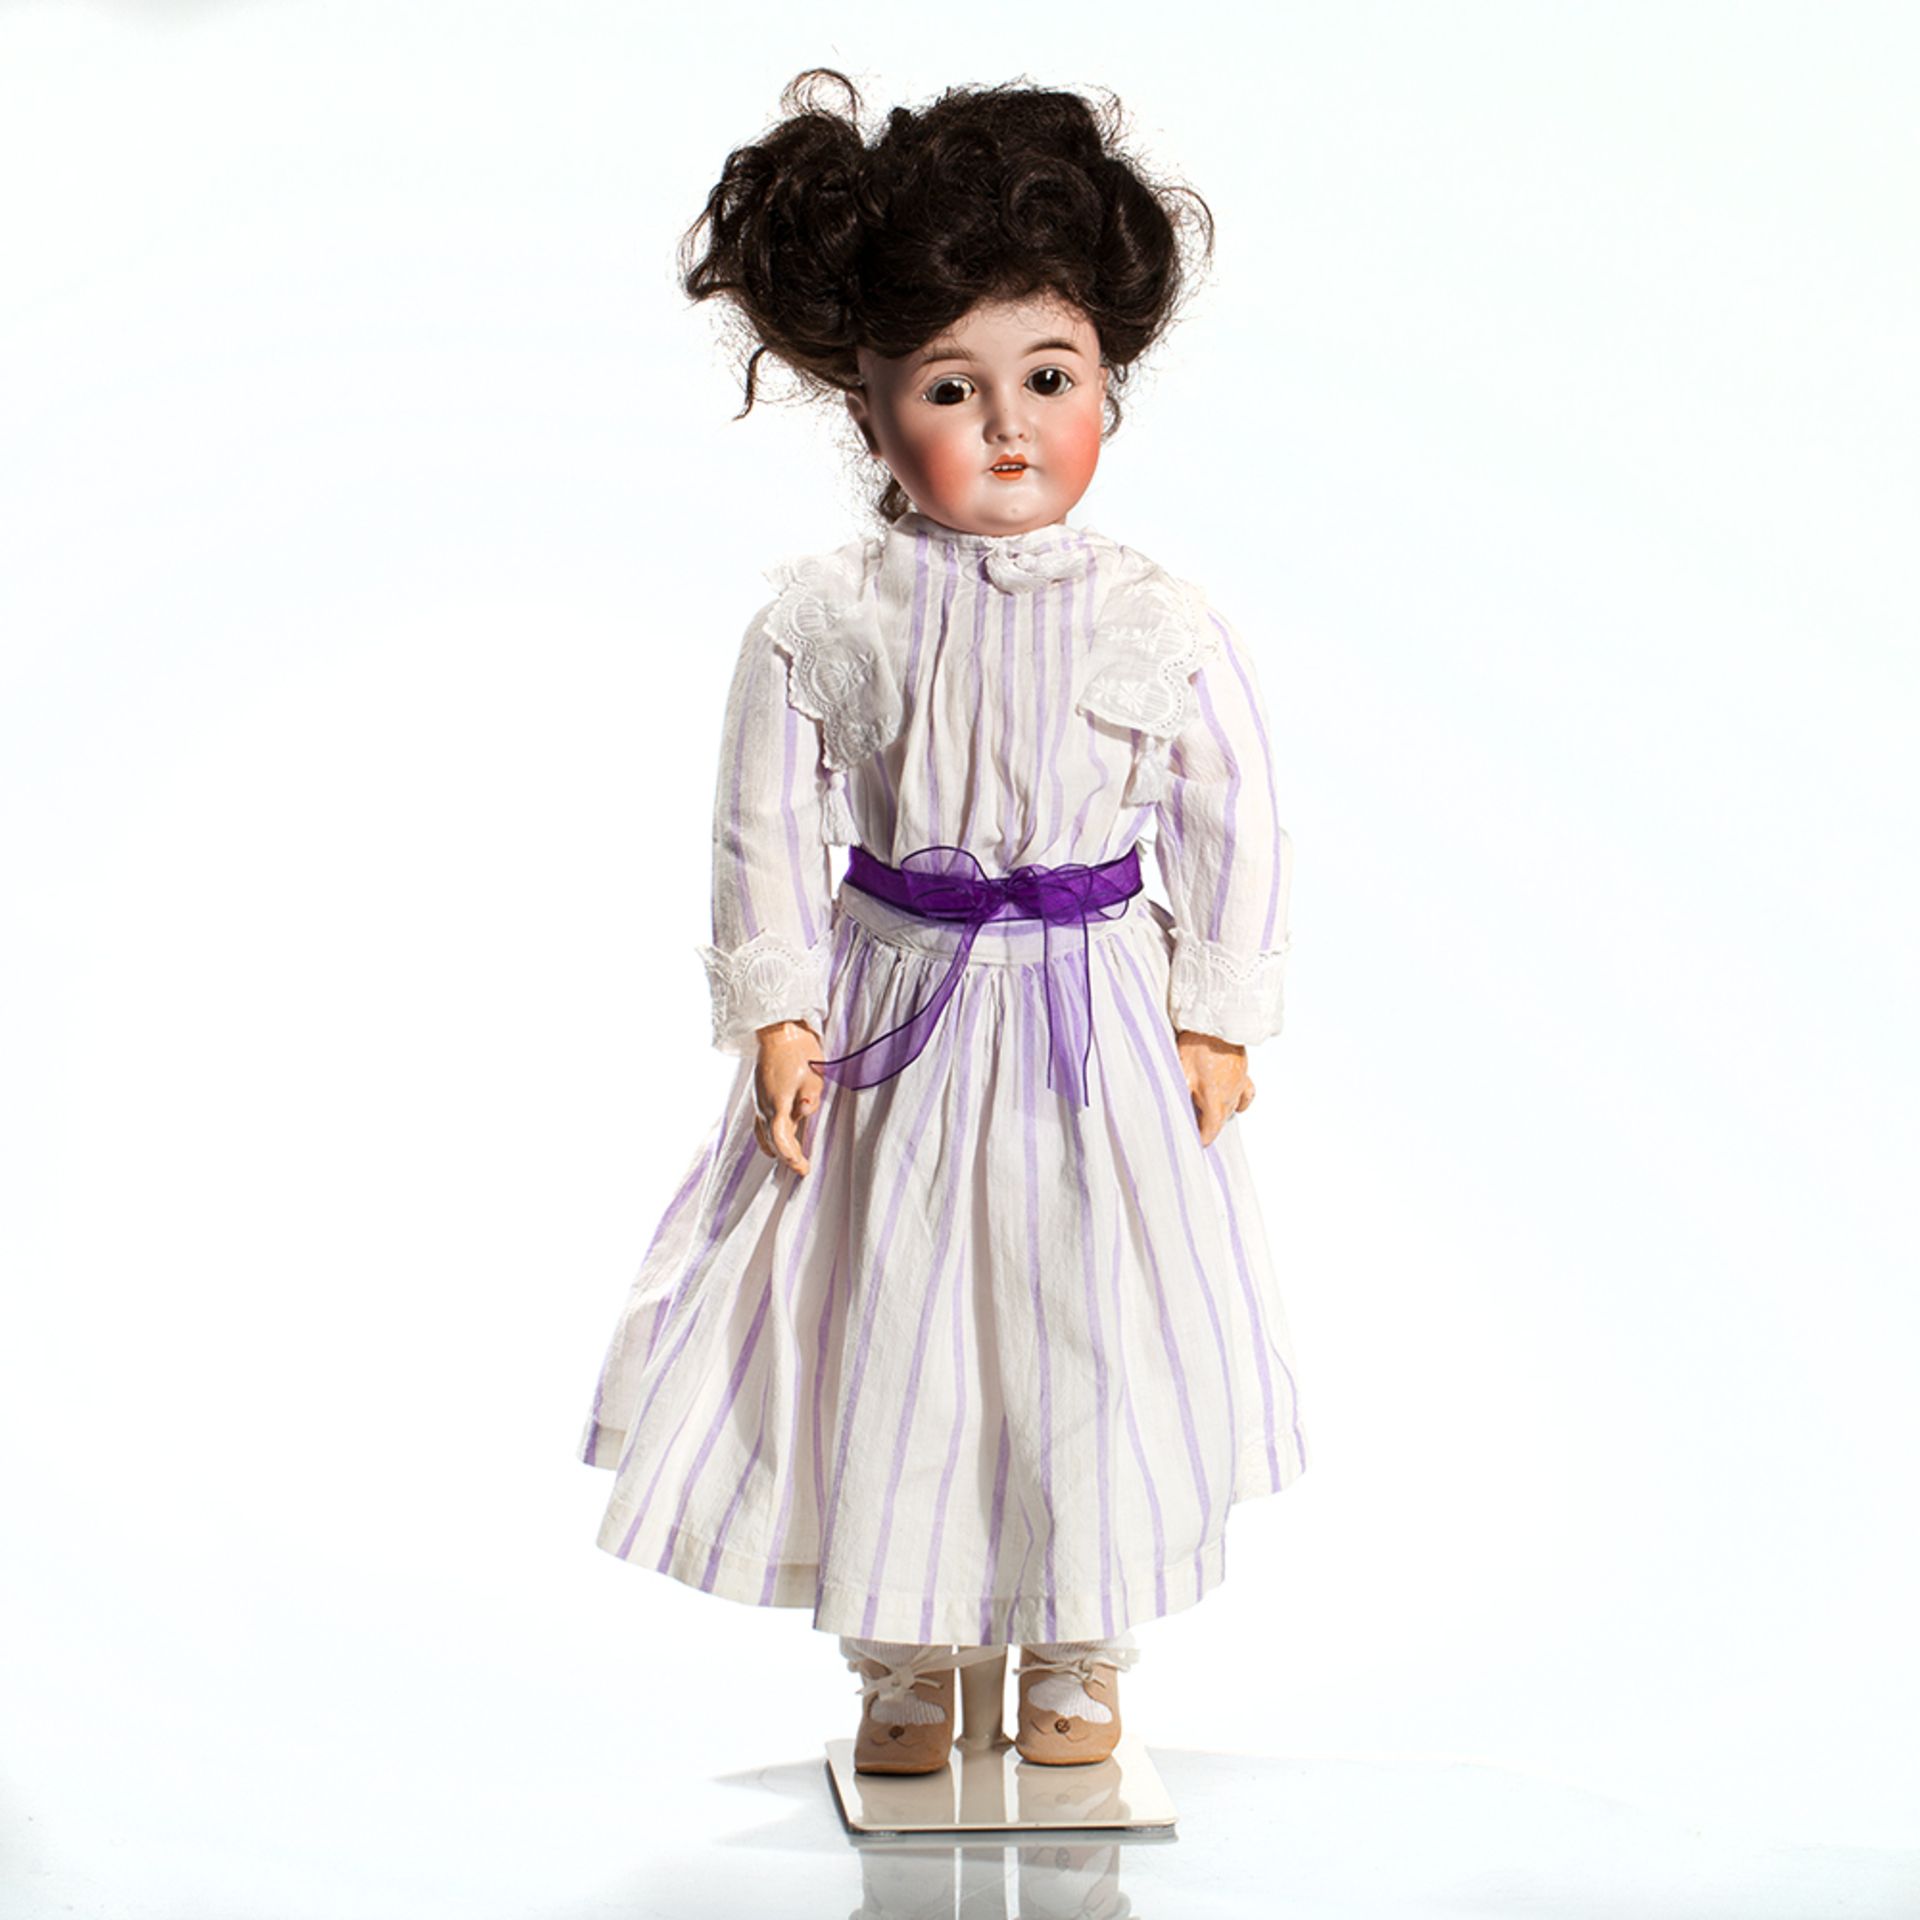 Large doll Queen Louise, Germany, around 1900 - Image 7 of 7